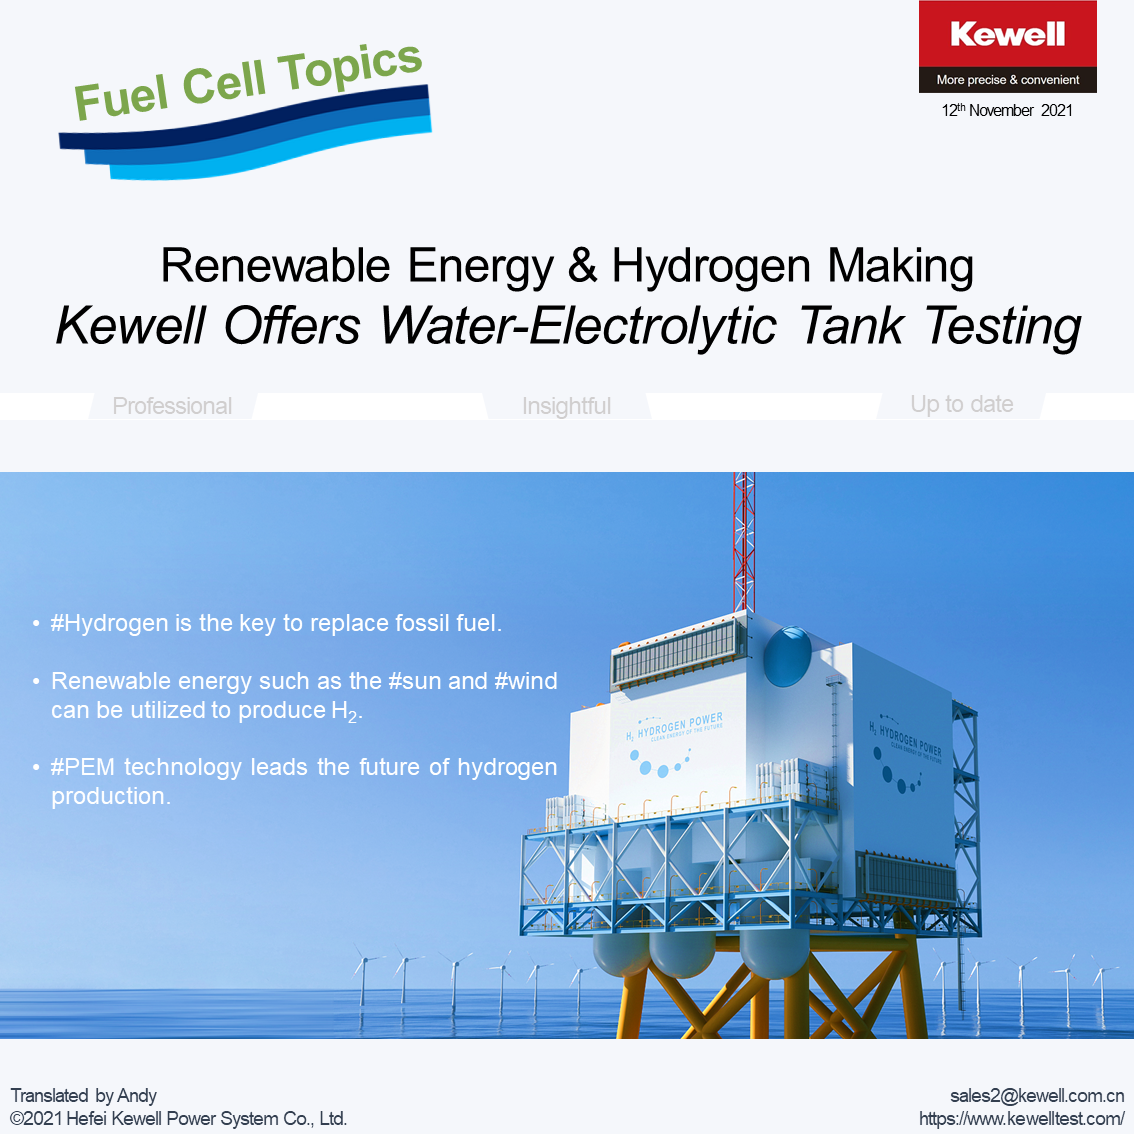 Fuel Cell Topics: Renewable Energy & Hydrogen Making, Kewell Offers Water-Electrolytic Tank Testing